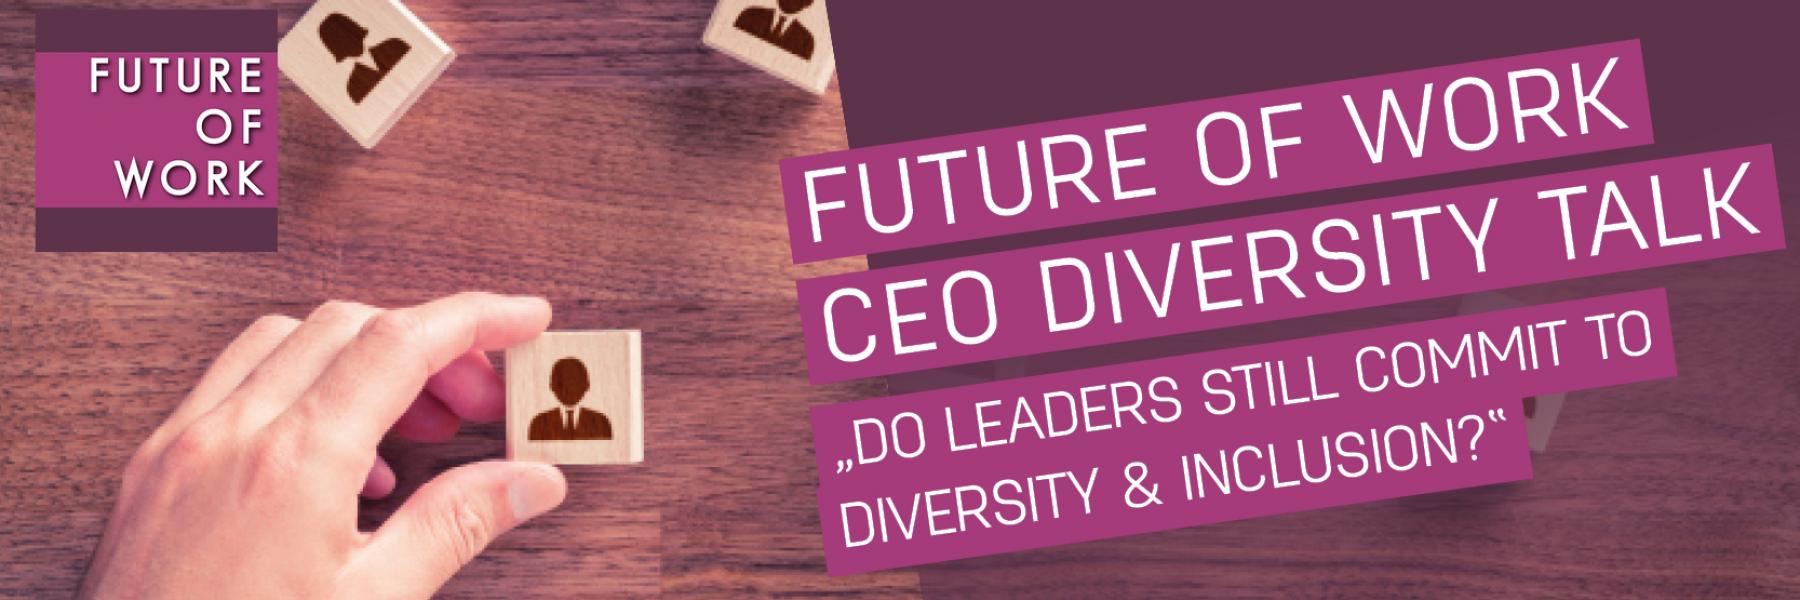  Future of Work CEO Diversity Talk: Do Leaders still commit to Diversity and Inclusion?